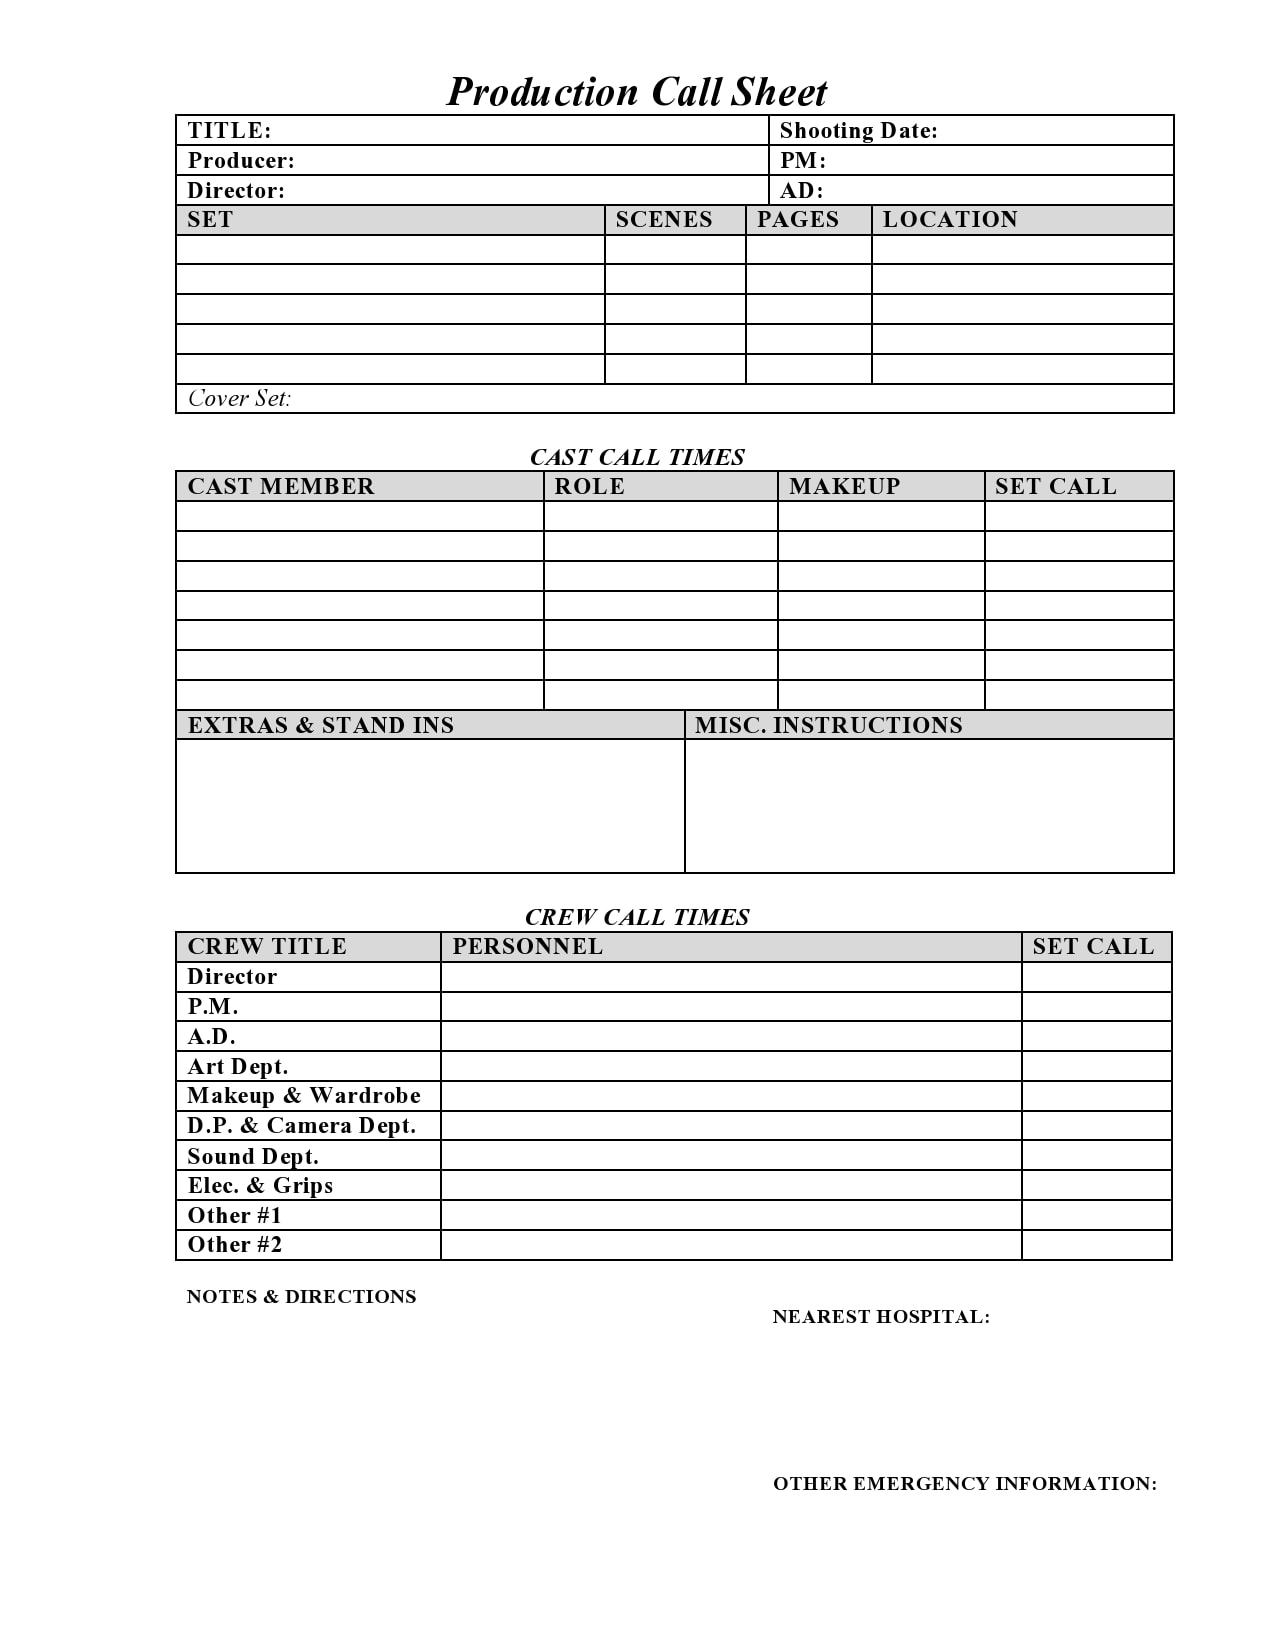 10 Simple Call Sheet Templates (FREE) - TemplateArchive Regarding Blank Call Sheet Template